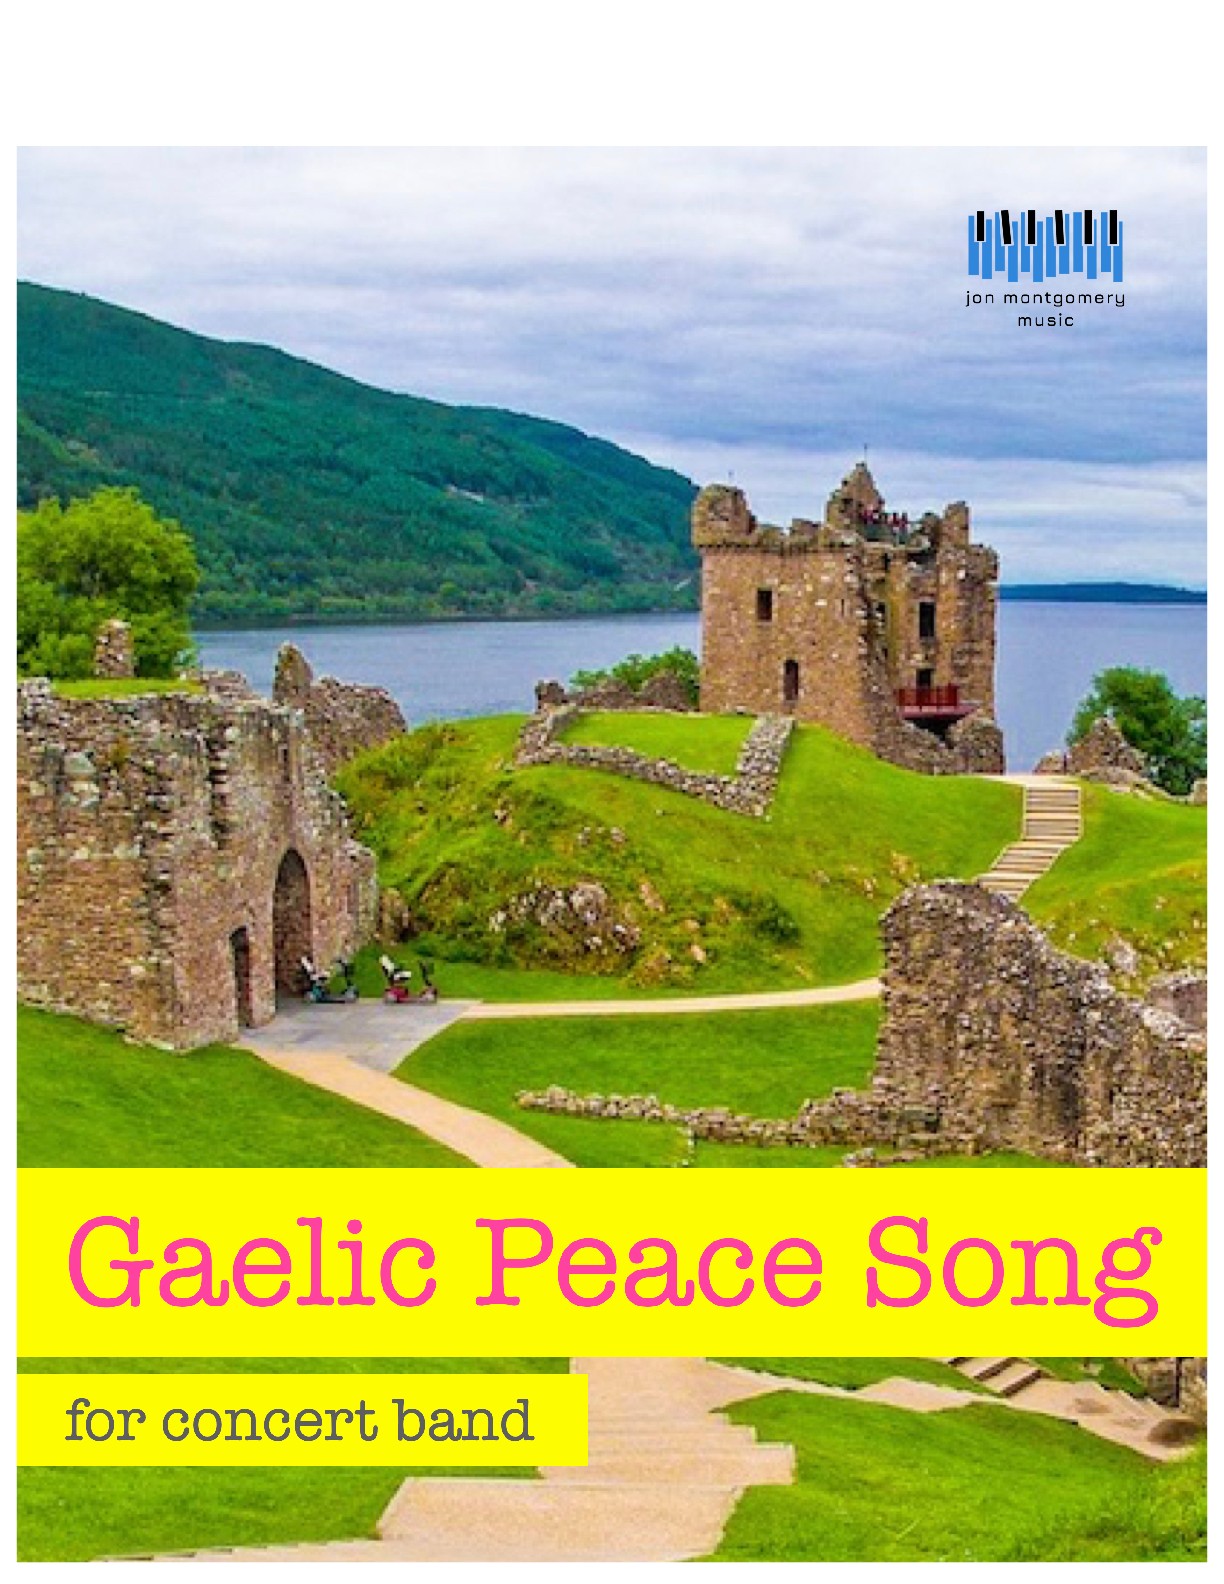 Gaelic Peace Song wrapper cover 1